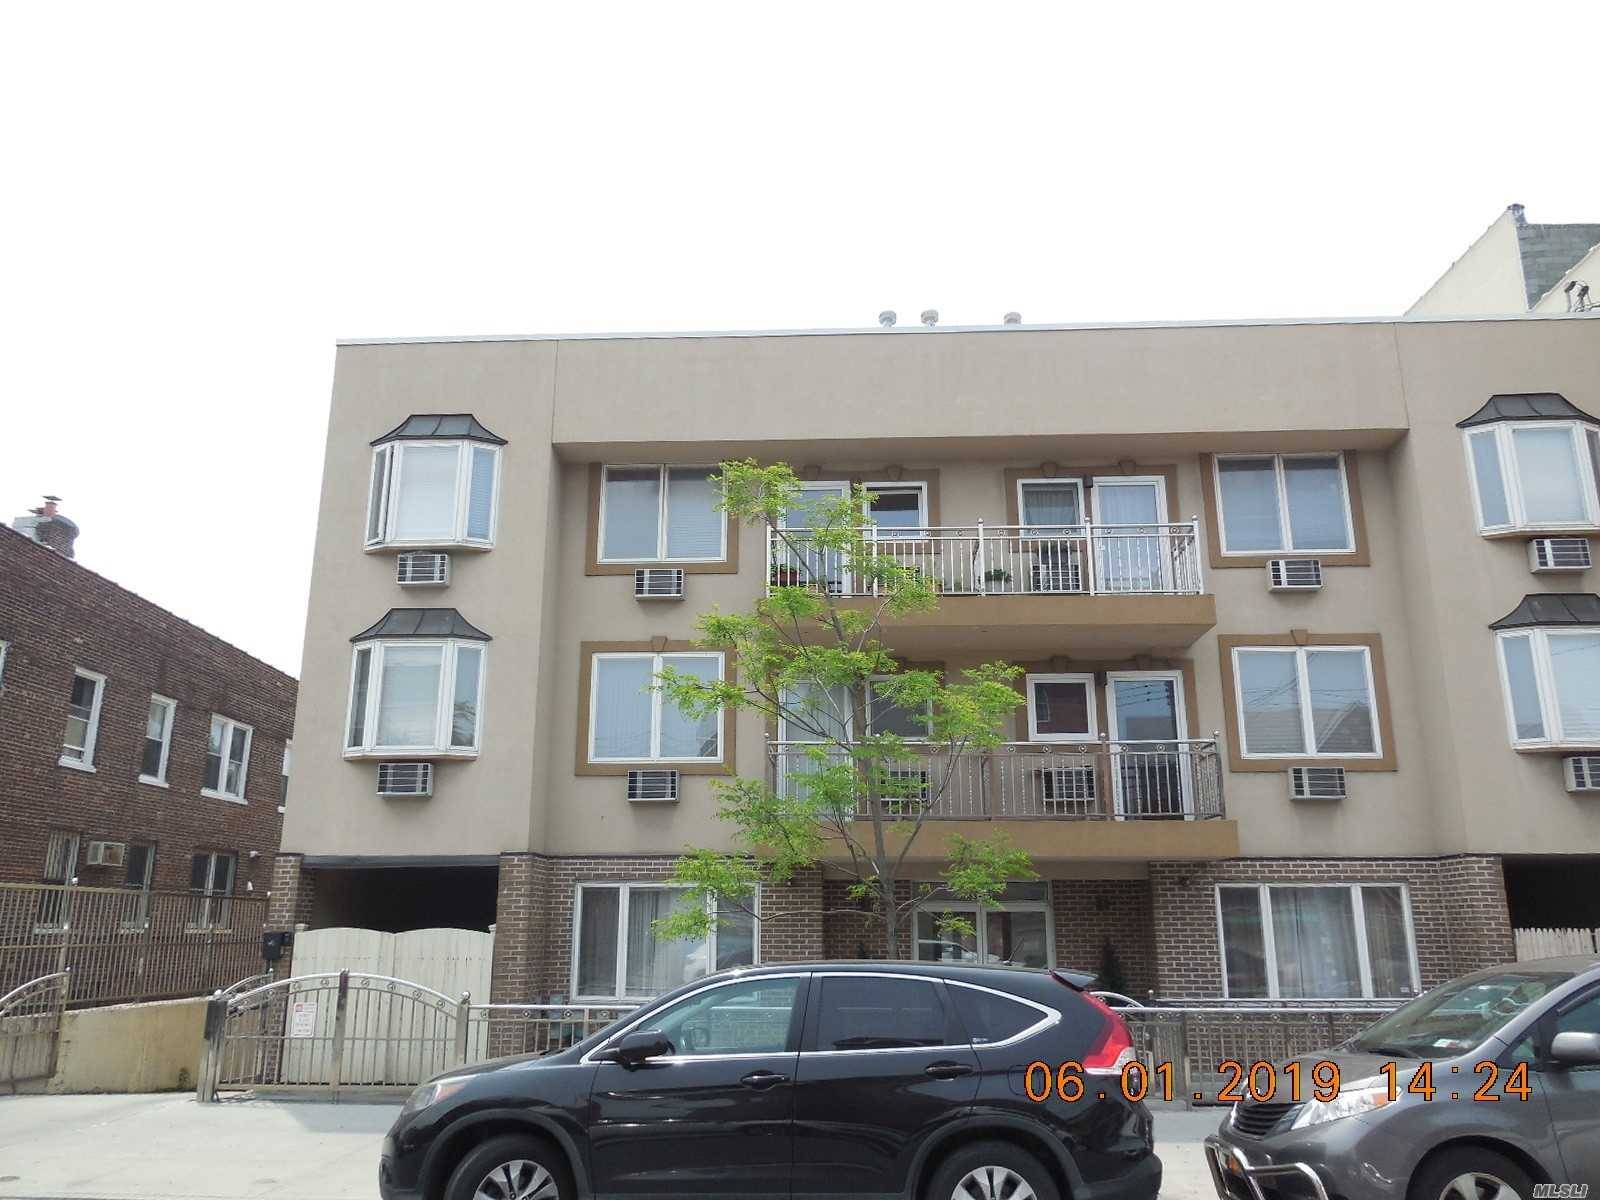 Spacious two bedroom two bathroom condo located in a desirable sort after Ridgewood neighborhood.